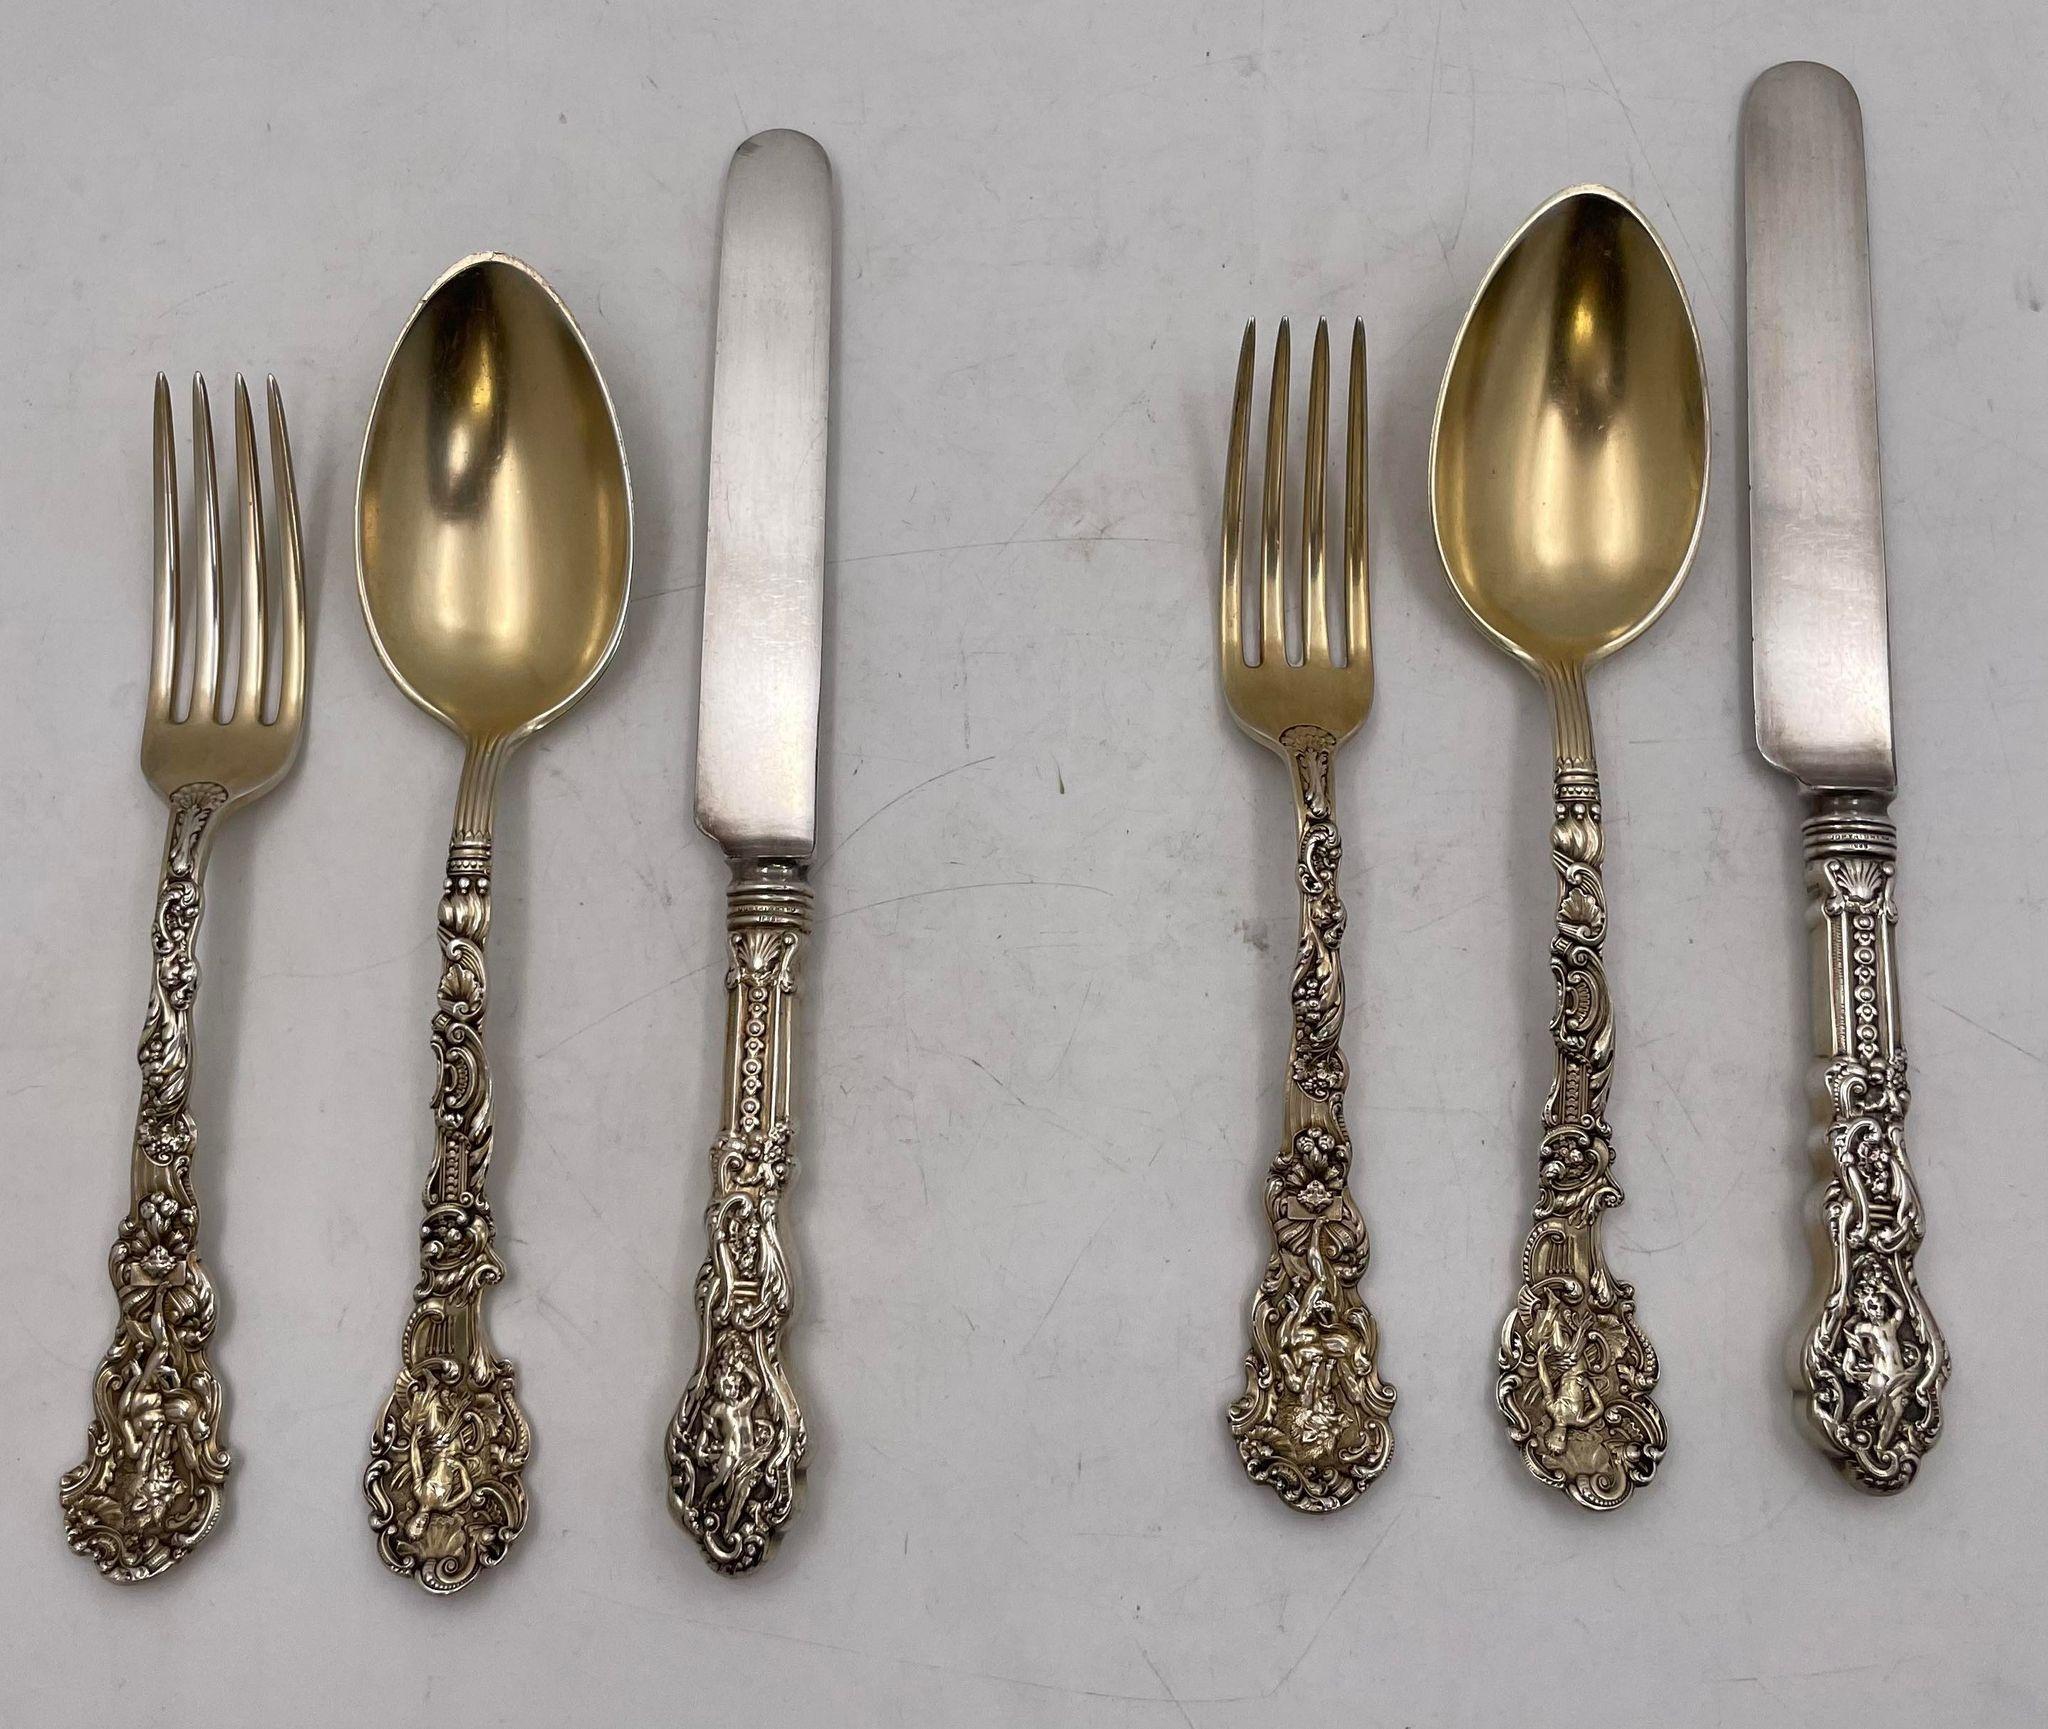 Gorham sterling silver 6-piece set in the Versaille pattern. It contains 2 dinner forks (8.5 in), 2 dinner knife (9.75 in), and 2 table spoons (8.75 in) with beautiful detailing including cherubs and figures. 

 During the heyday of American